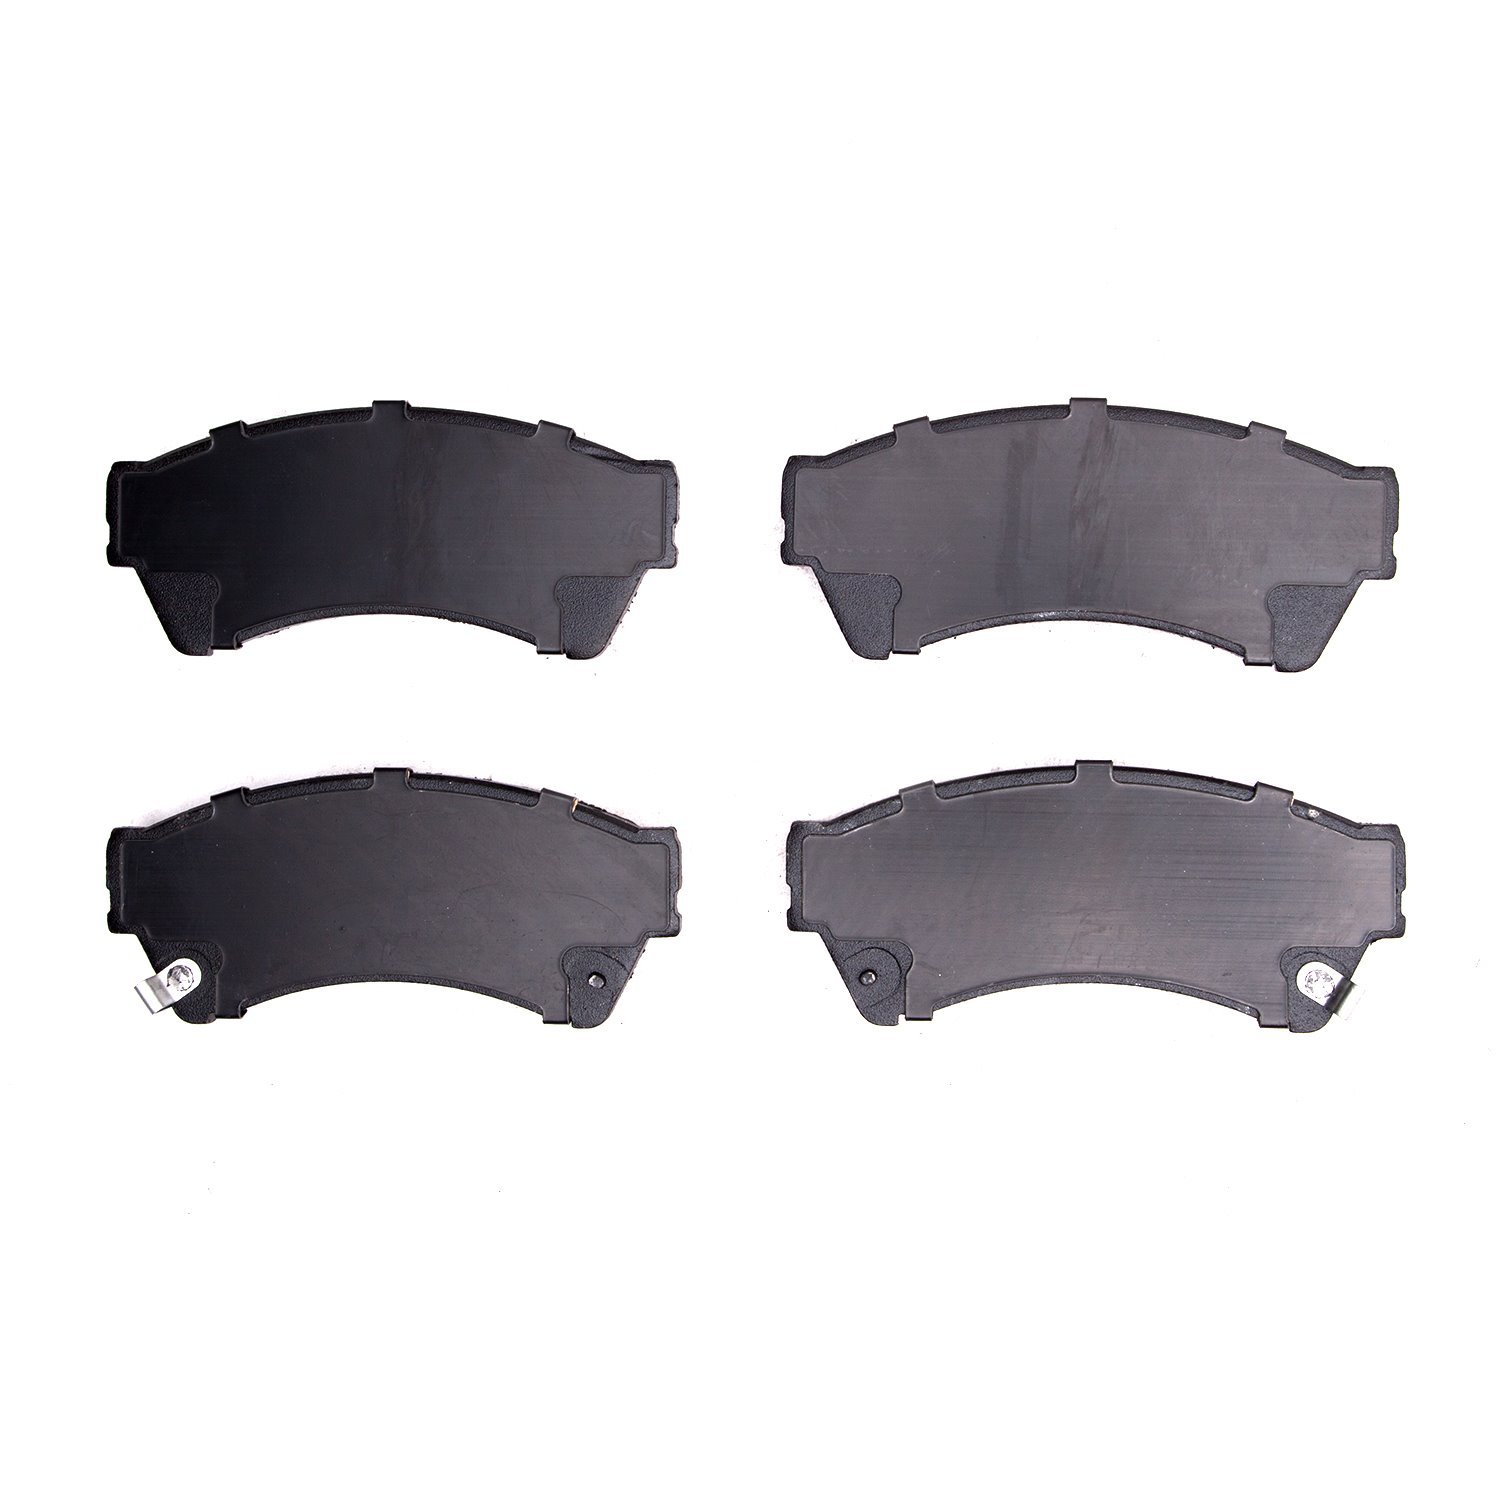 1000-1164-00 Track/Street Low-Metallic Brake Pads Kit, 2006-2013 Ford/Lincoln/Mercury/Mazda, Position: Front